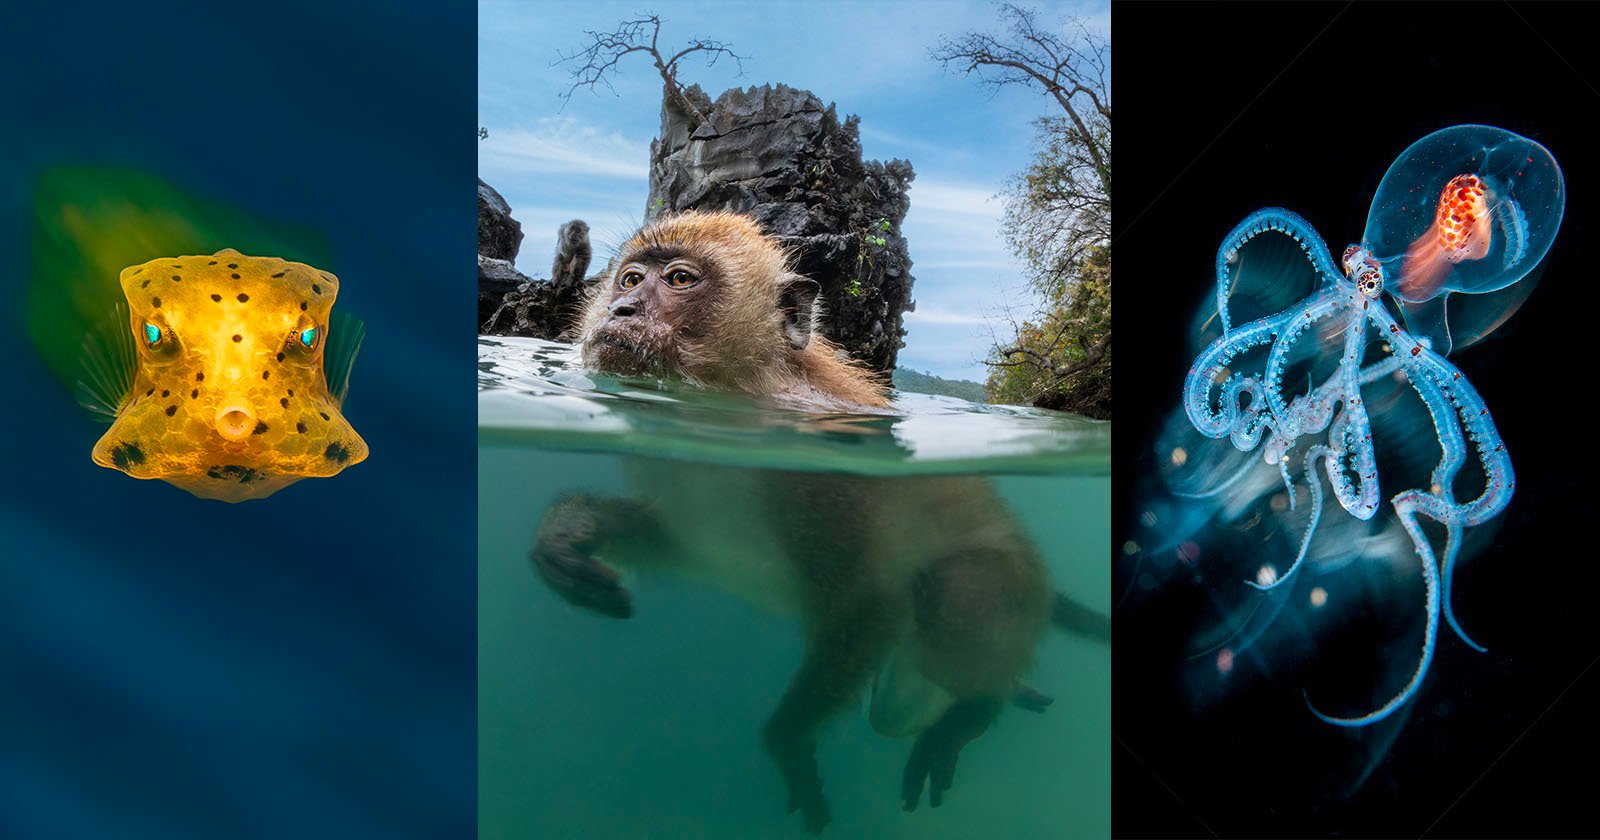 Underwater Photo Competition Sees Swimming Monkeys and Alien Octopus